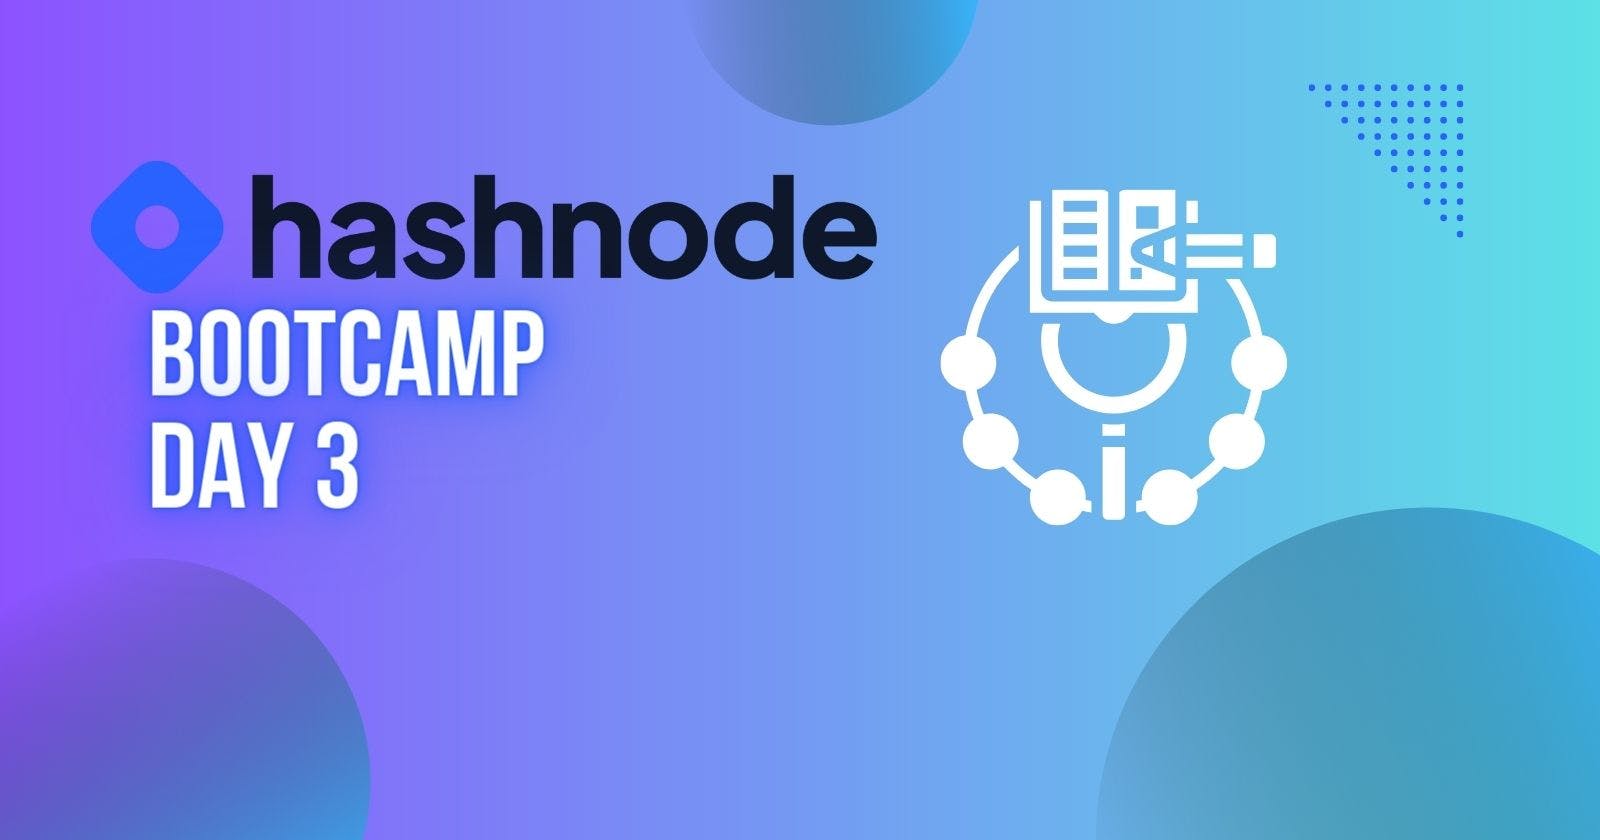 Monetizing Your Expertise and Exploring Opportunities- Day 3 of Hashnode Bootcamp